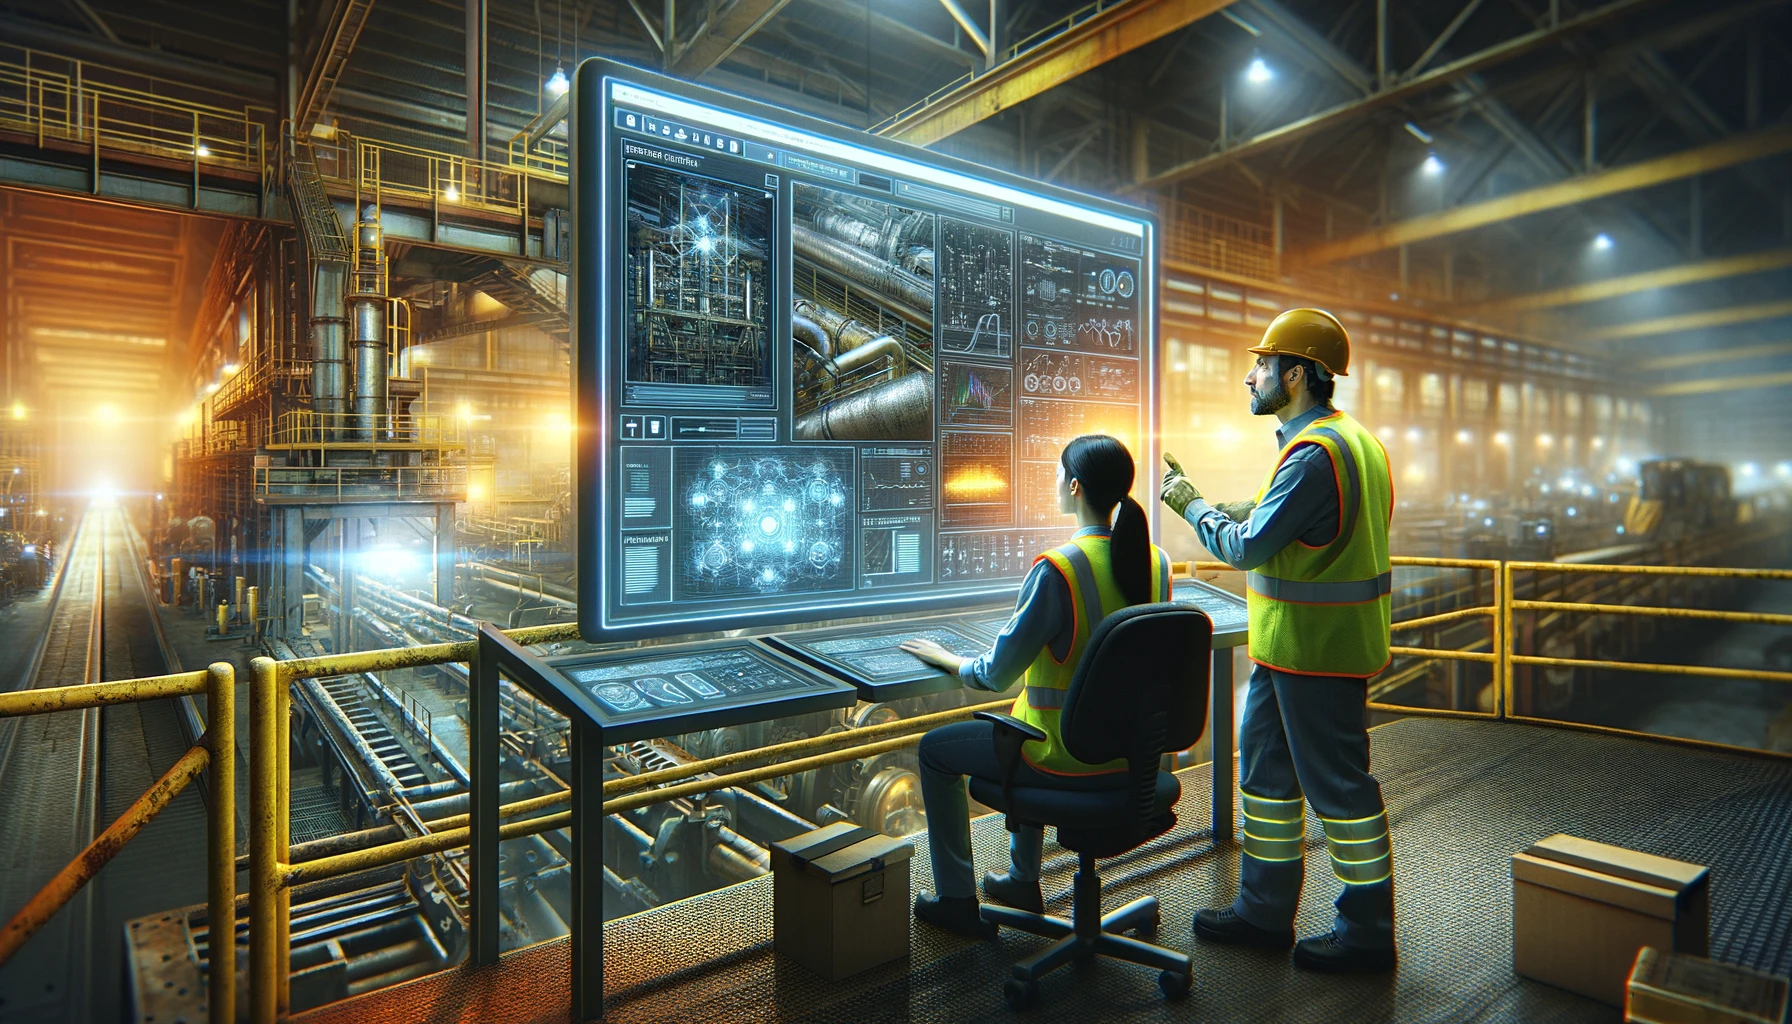 The scene features two engineers in a high-tech industrial setting, working together at a large digital monitor displaying complex data. T